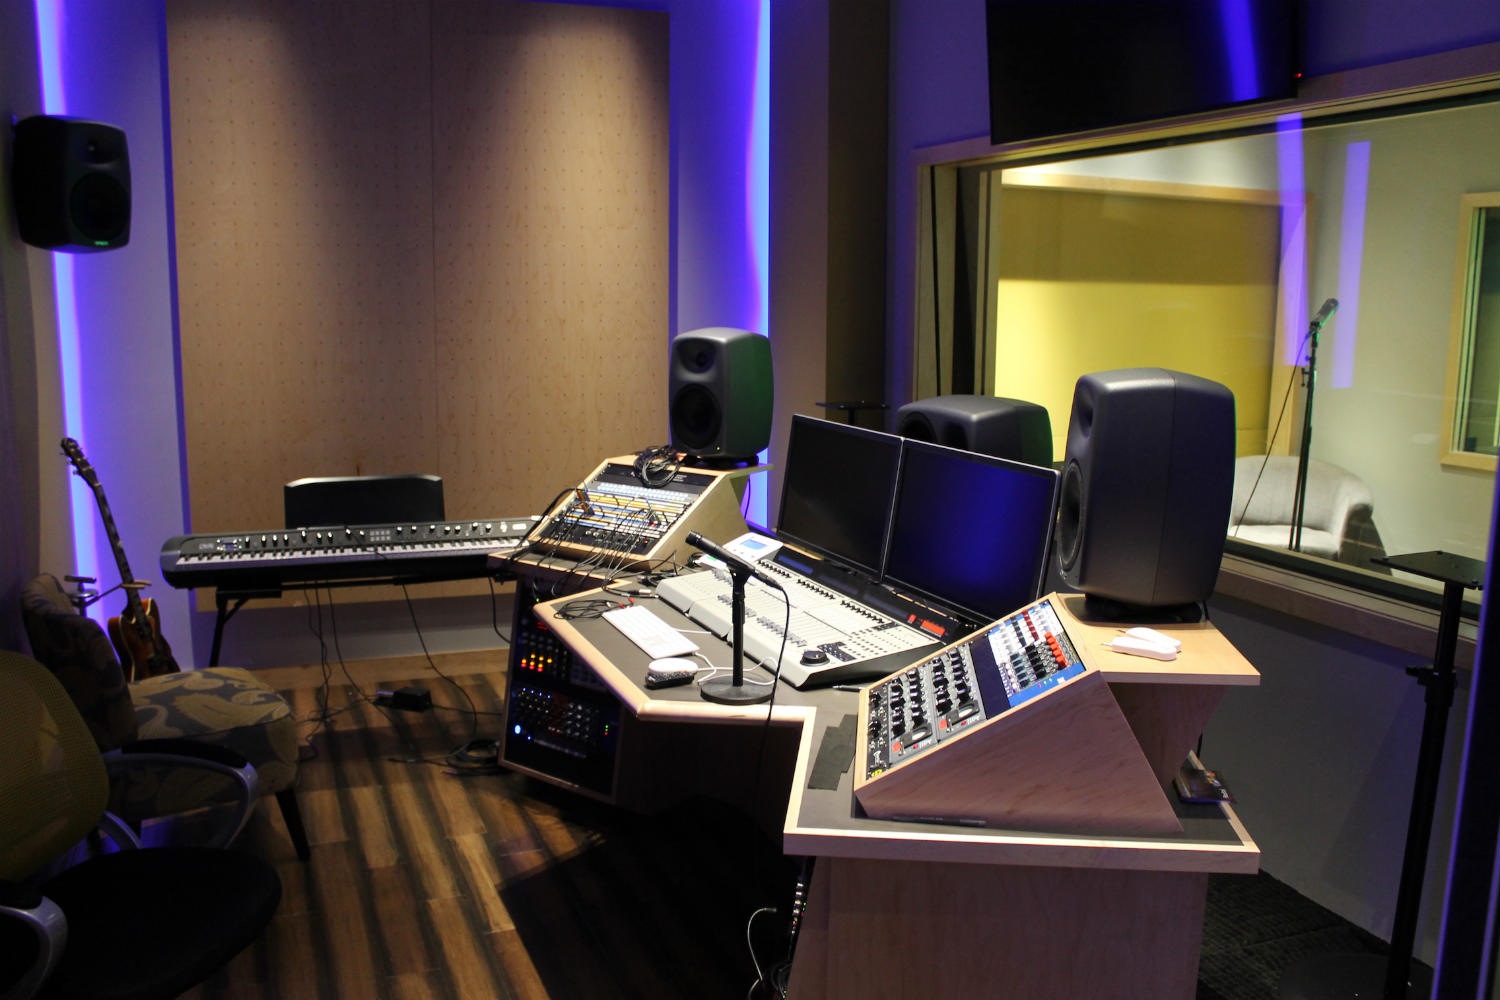 MJH Studios in NJ, designed by WSDG, is a world-class recording and production facility for the main use of creating audio and video healthcare-related content by MJH for their clients. Main Control Room